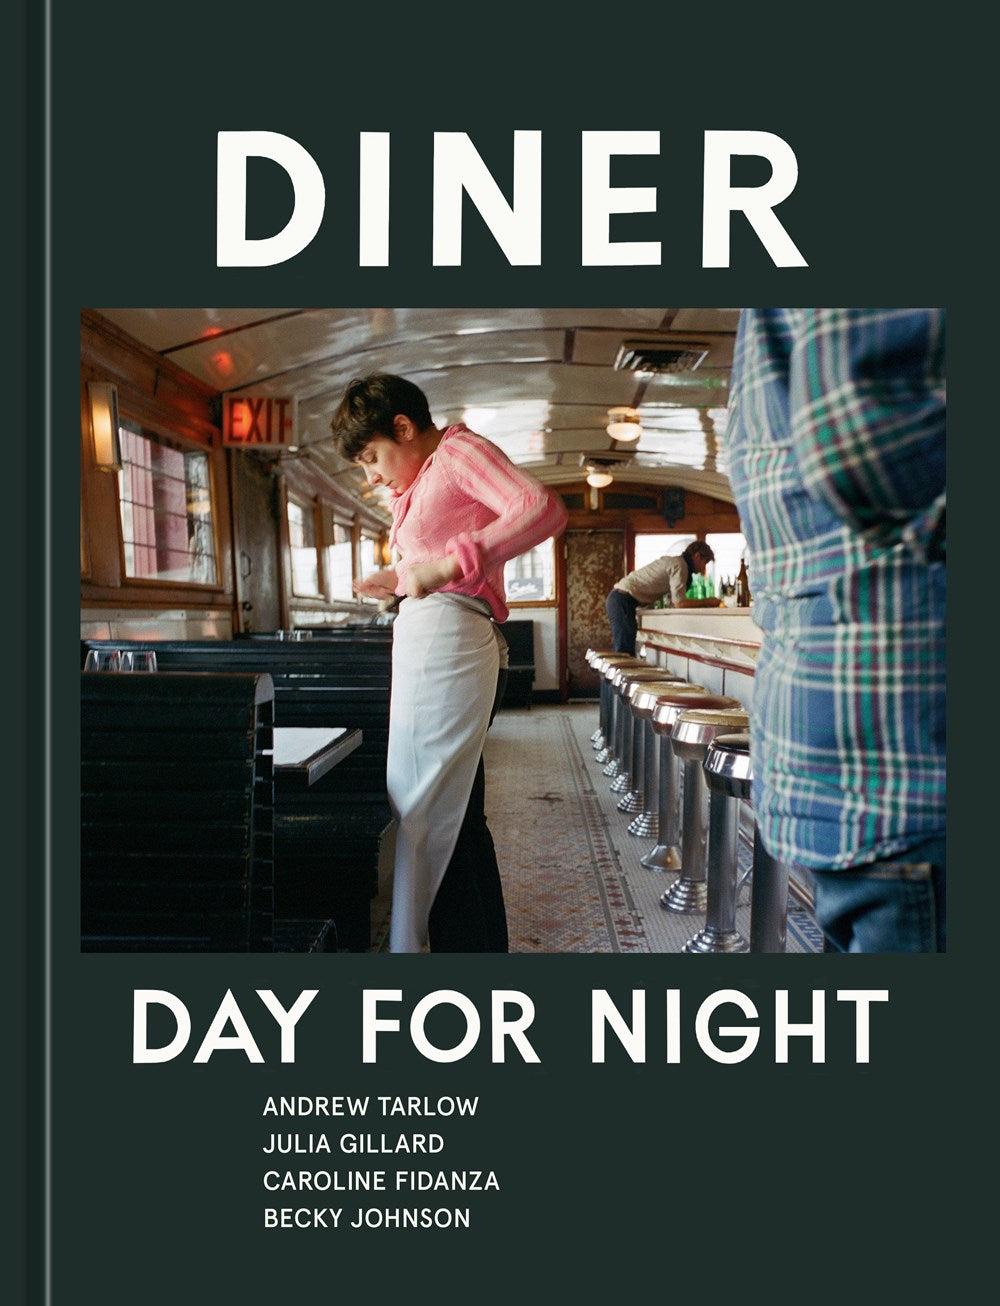 Diner: Day for Night by Andrew Tarlow (9/26/23)